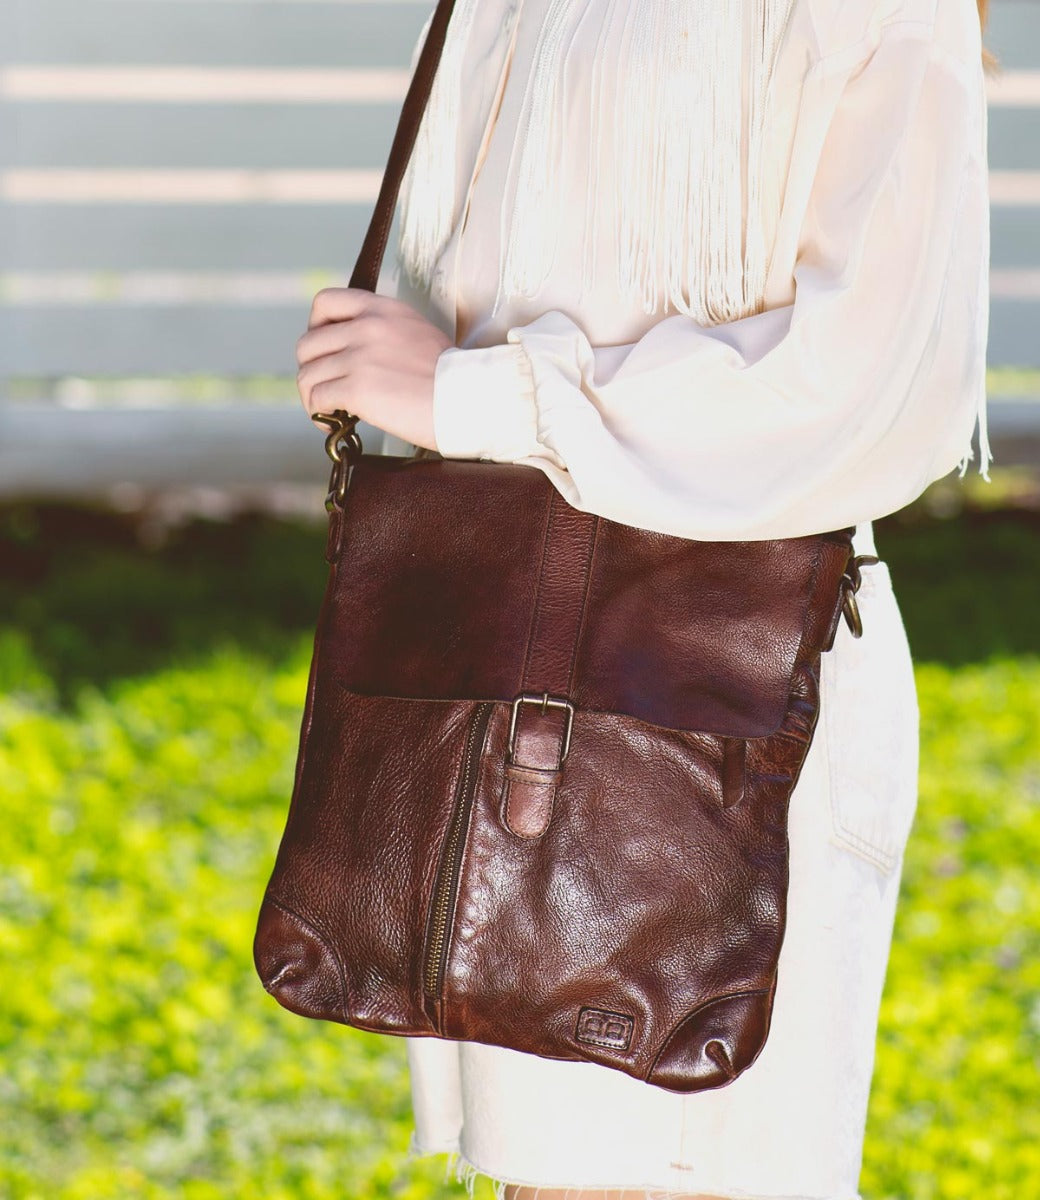 A woman holding a brown leather Bed Stu Jack crossbody bag.